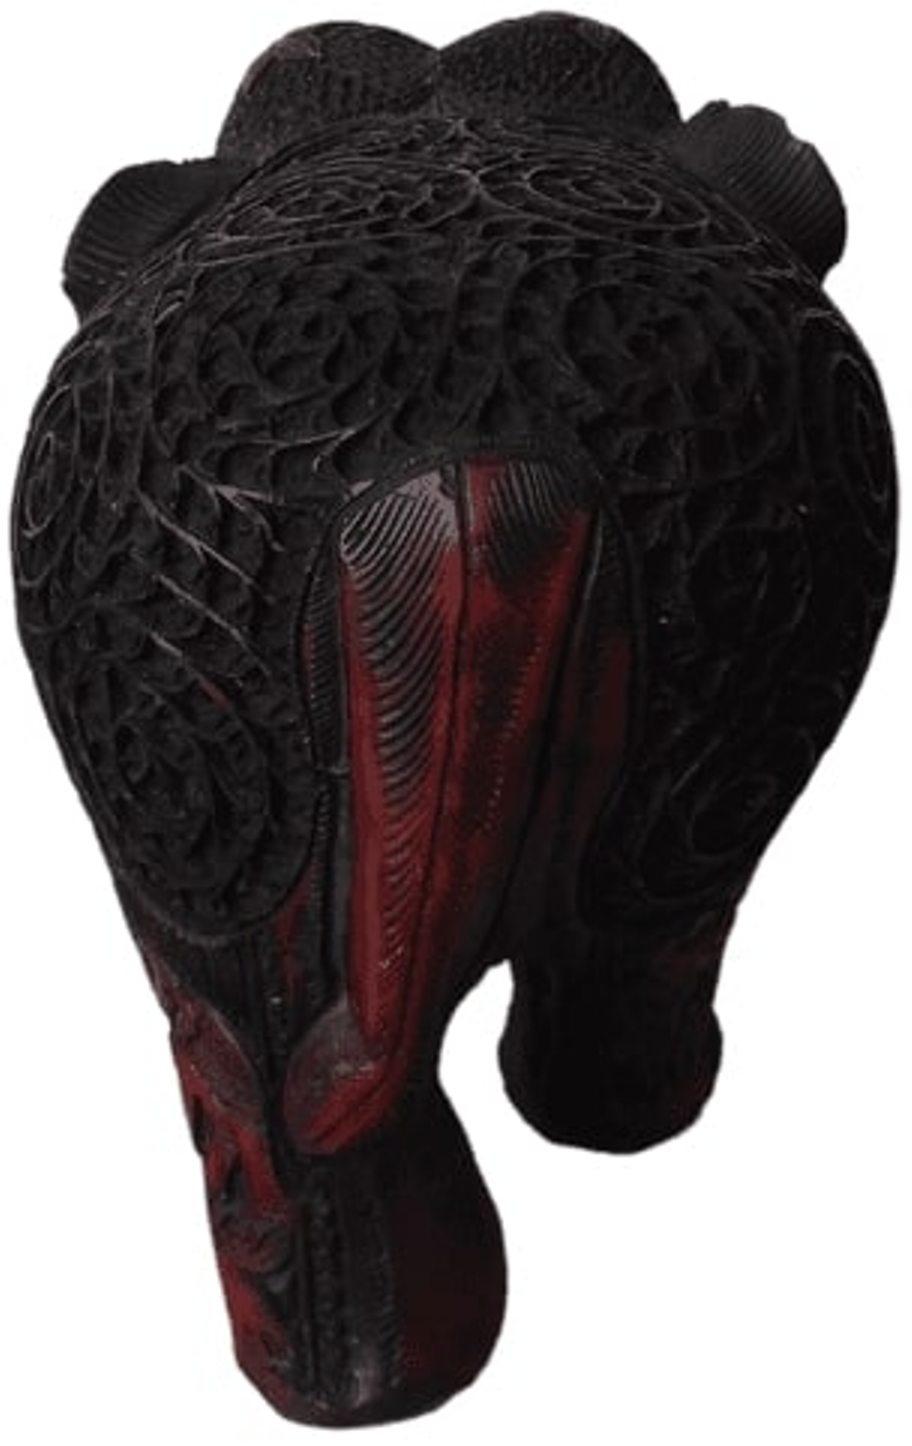 Elephant, Sculpture, Artifacts, Resin by Contemporary Artist “In Stock” For Sale 3